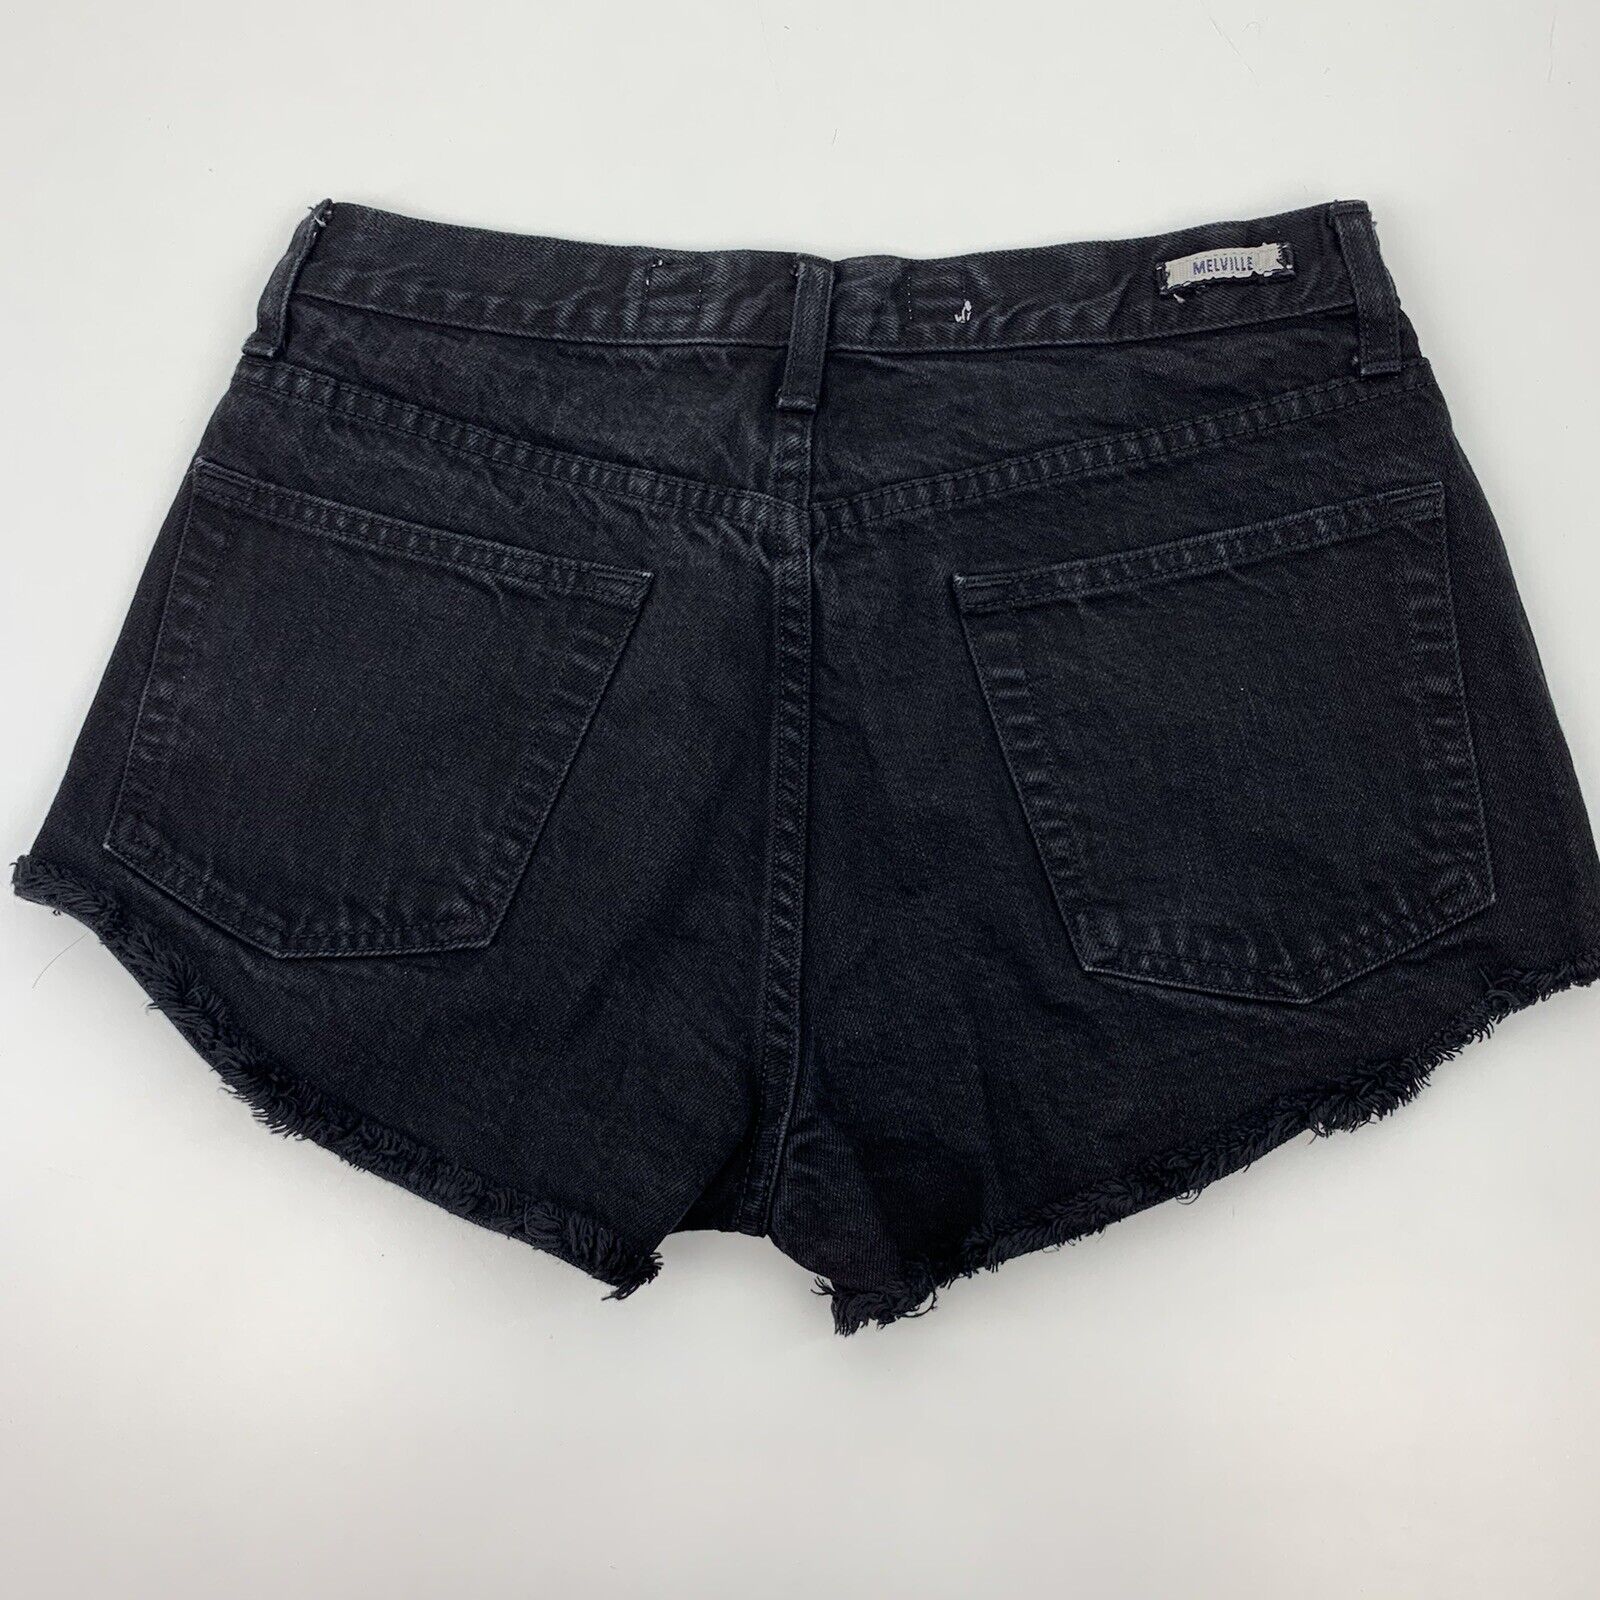 Brandy Melville Shorts and Tops Lot Black One Size - image 3